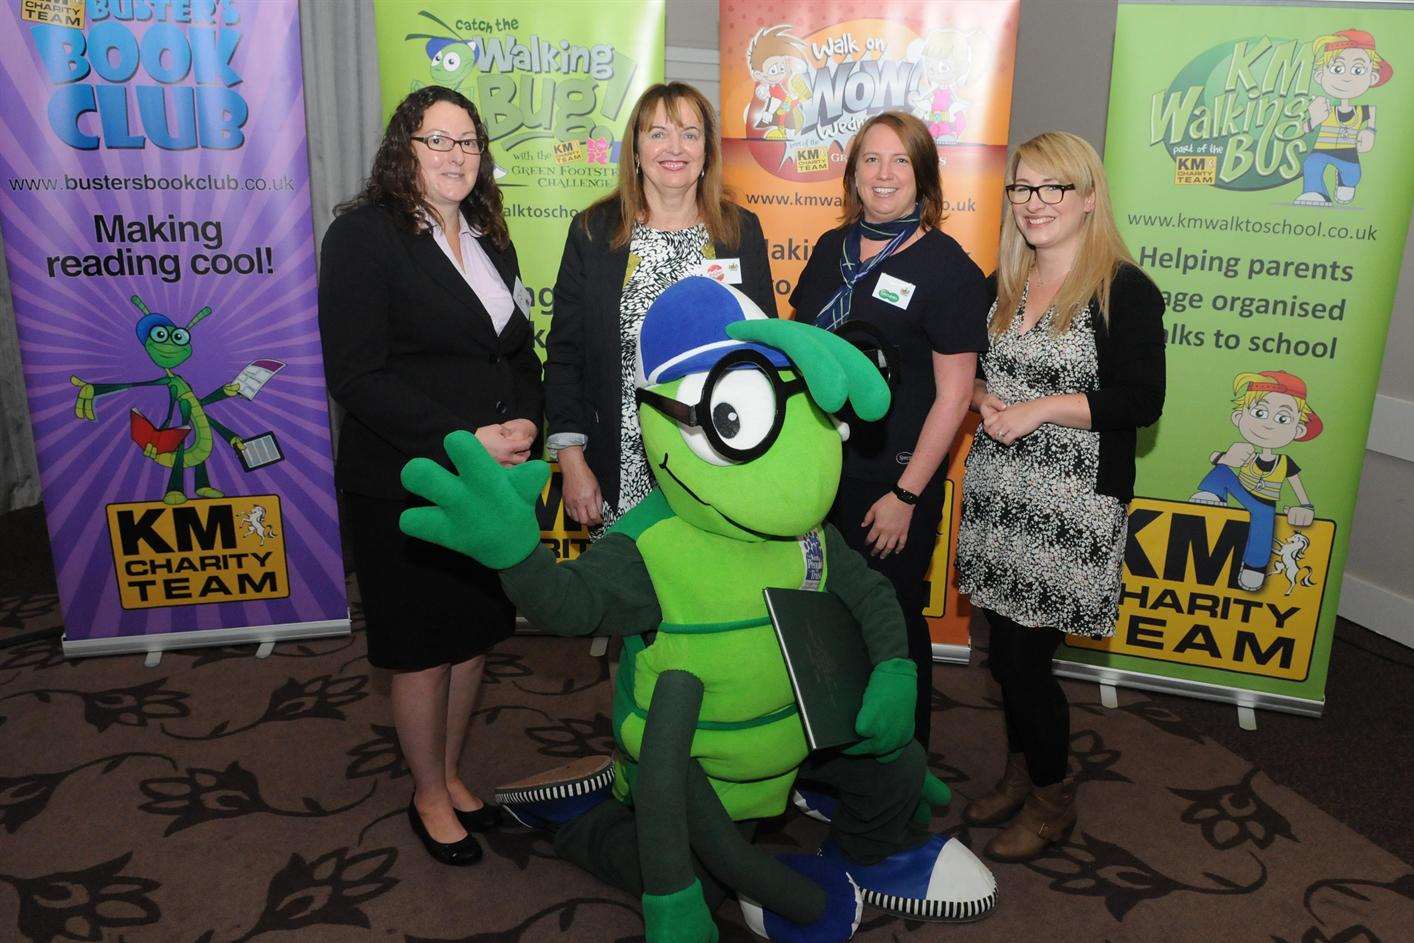 Formal launch of Buster's Book Club at the KM Charity Team's annual forum at Mercure Great Danes Hotel, Maidstone, with sponsors Nicki Curry (Three R's Teacher Recruitment), Elizabeth Carr (Mini Babybel), Ruth Warren (Specsavers) and Sarah Butler (Orbit South).